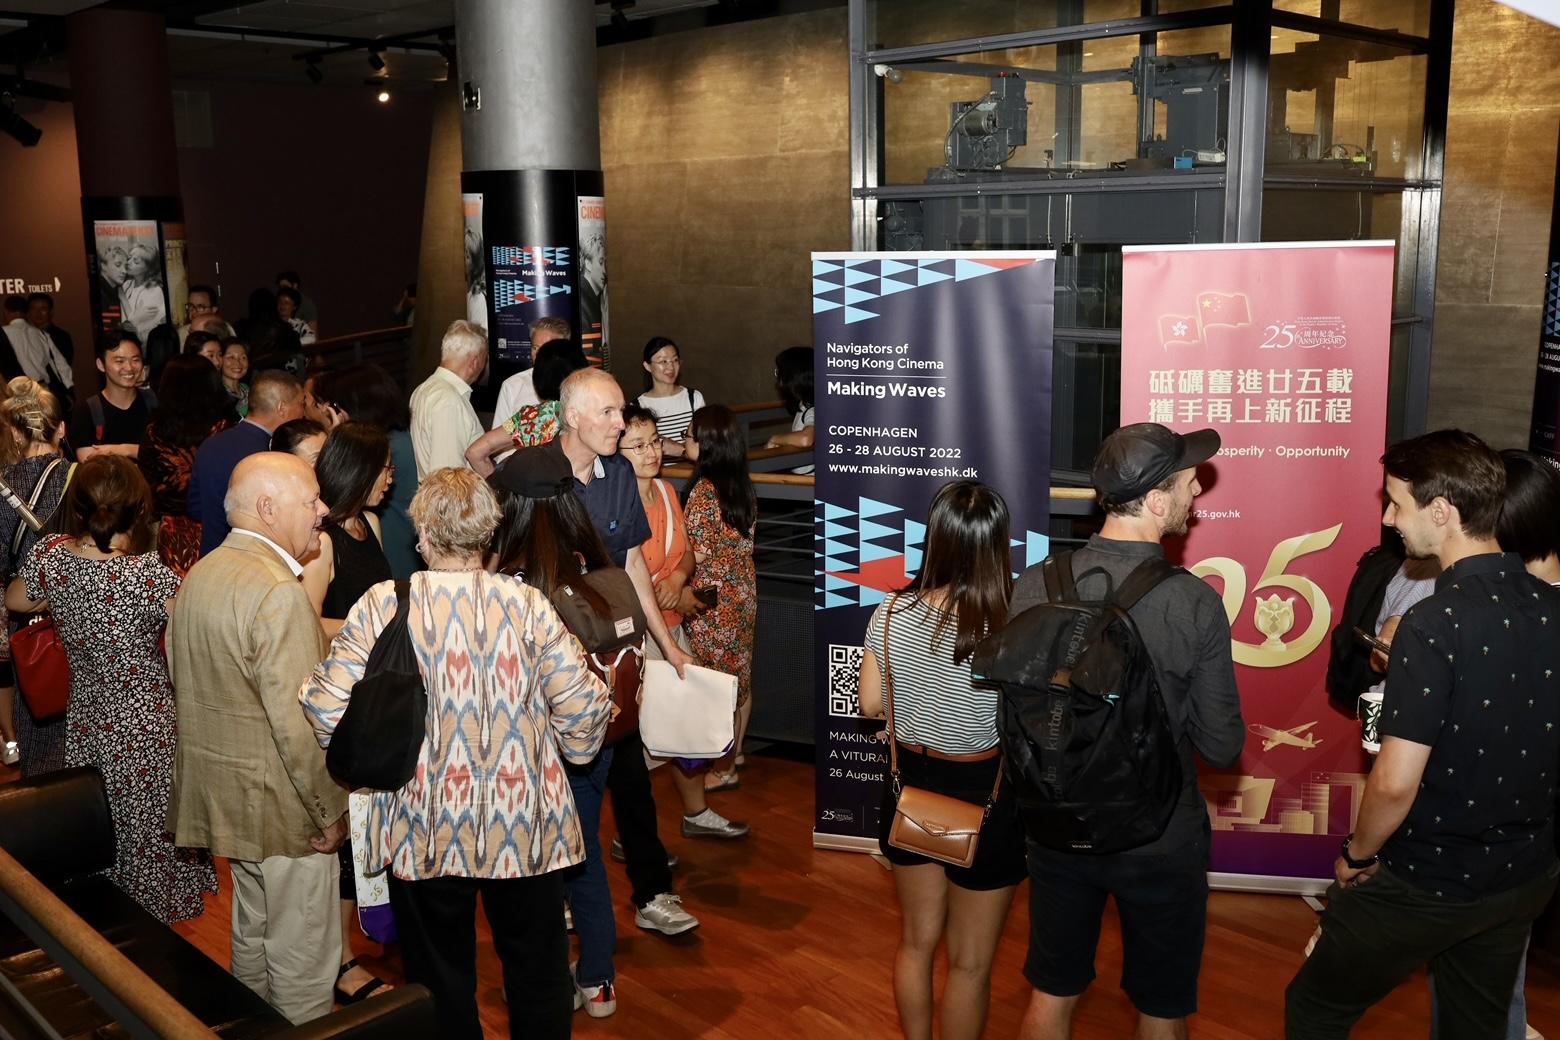 To commemorate the 25th anniversary of the establishment of the Hong Kong Special Administrative Region, the Hong Kong Economic and Trade Office, London supported "Making Waves - Navigators of Hong Kong Cinema", showcasing a selection of new Hong Kong films and classics, in Copenhagen, Denmark, from August 26 to 28 (Copenhagen time). Photo shows the opening screening of "Making Waves - Navigators of Hong Kong Cinema" in Copenhagen, Denmark.